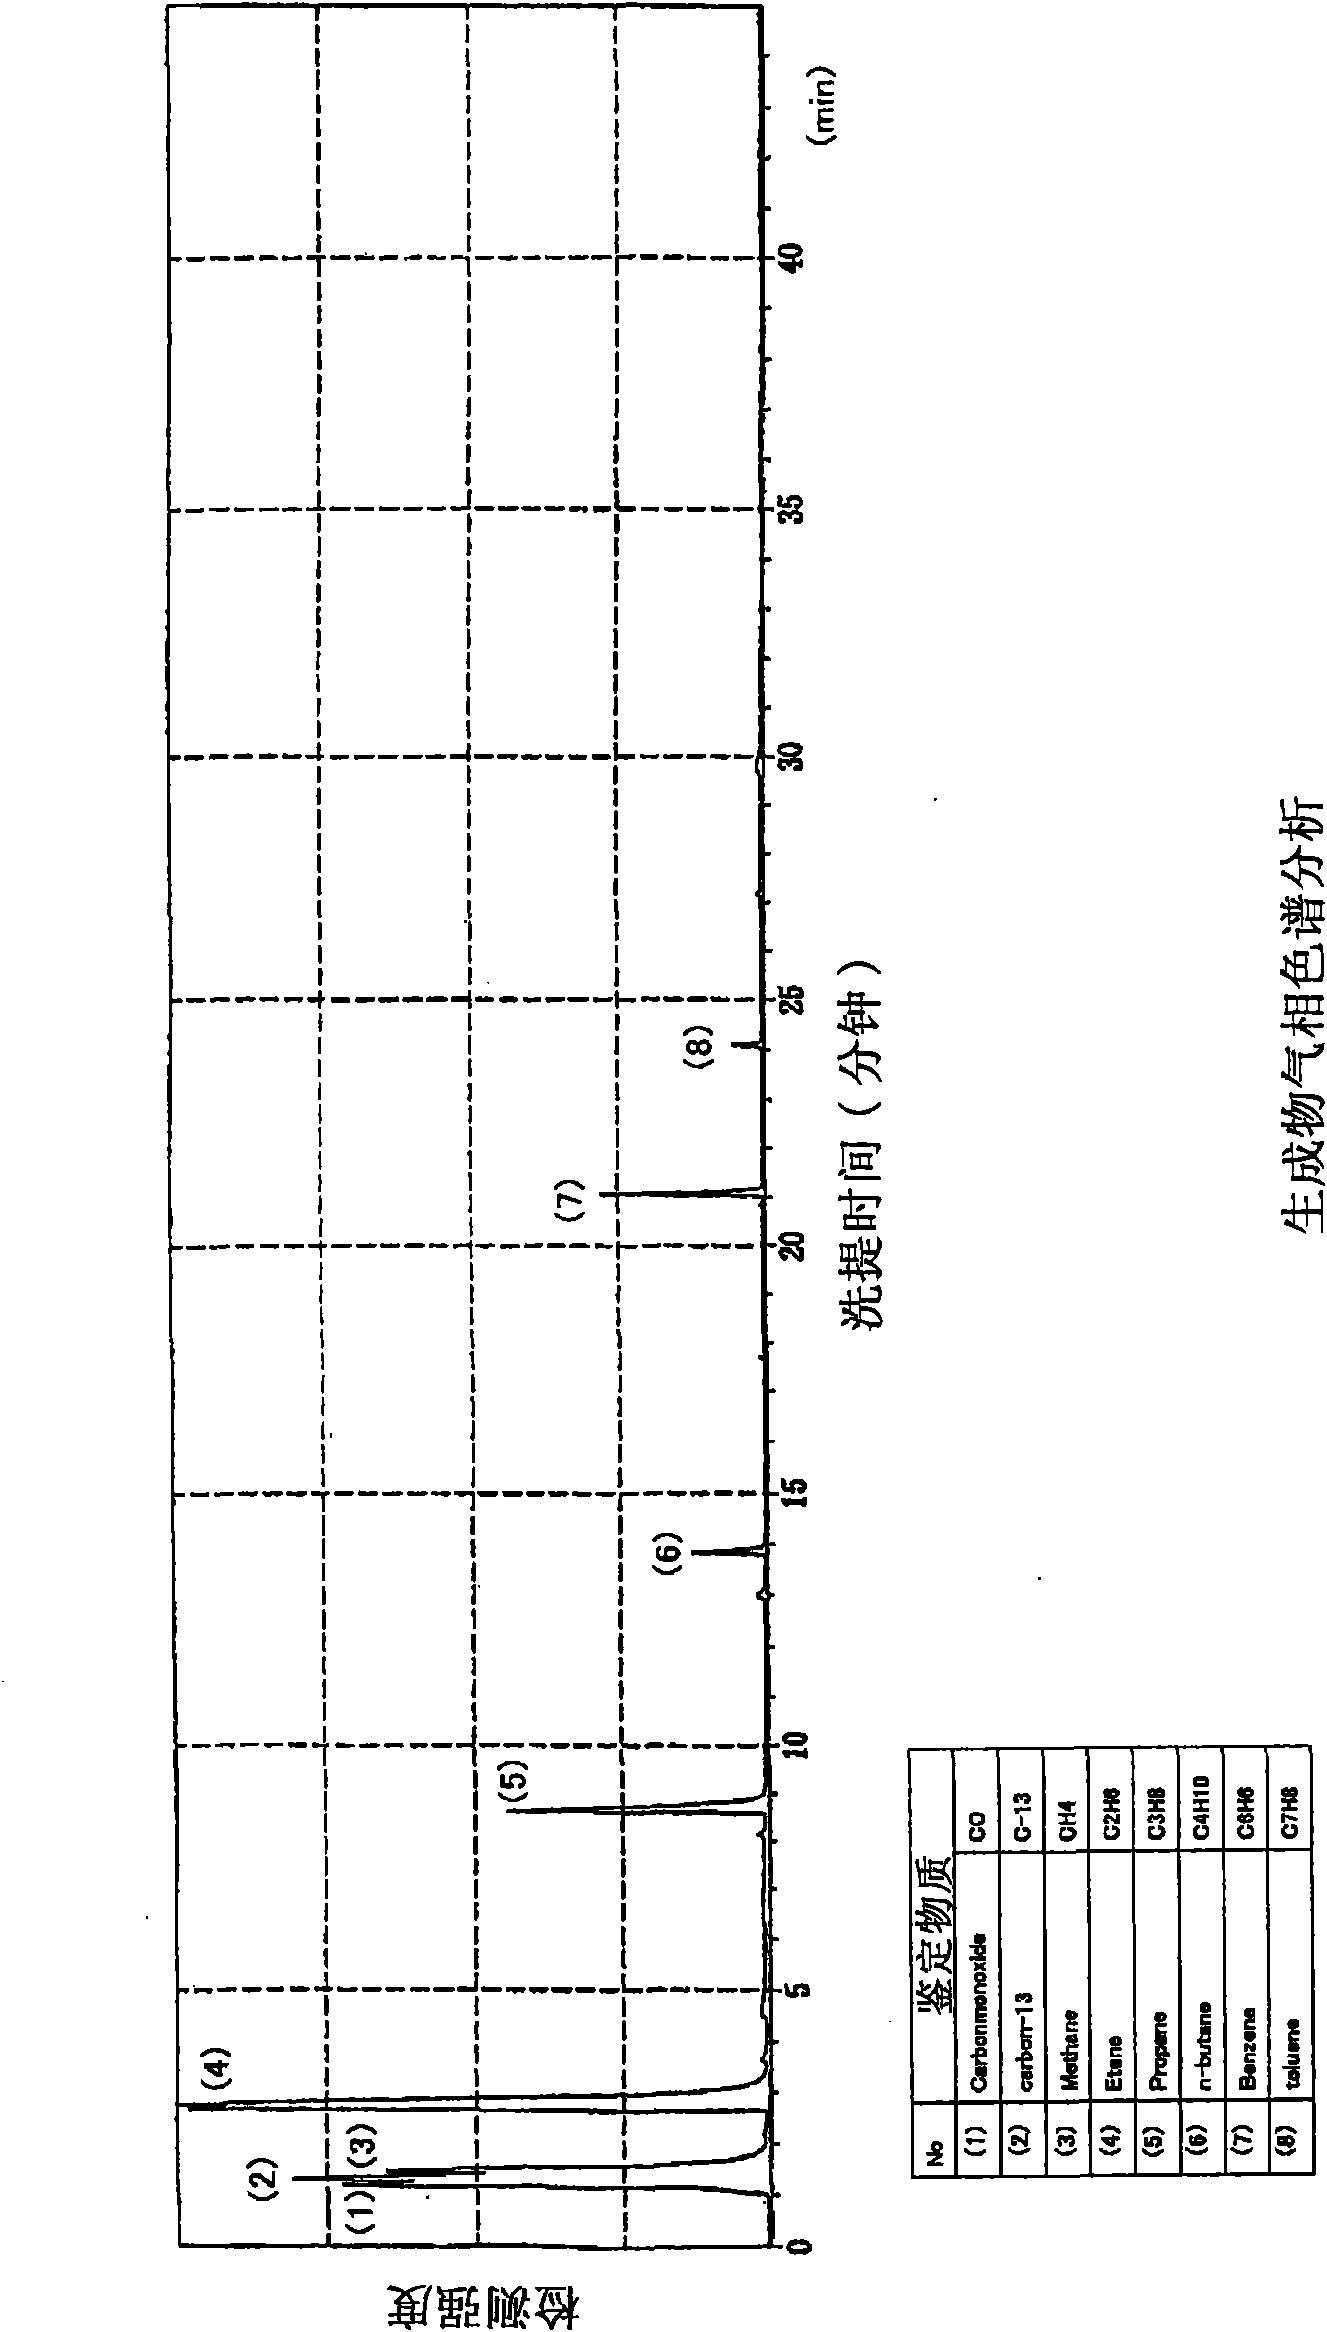 Method for production of nonradioactive and stable isotope of carbon having mass number of 13